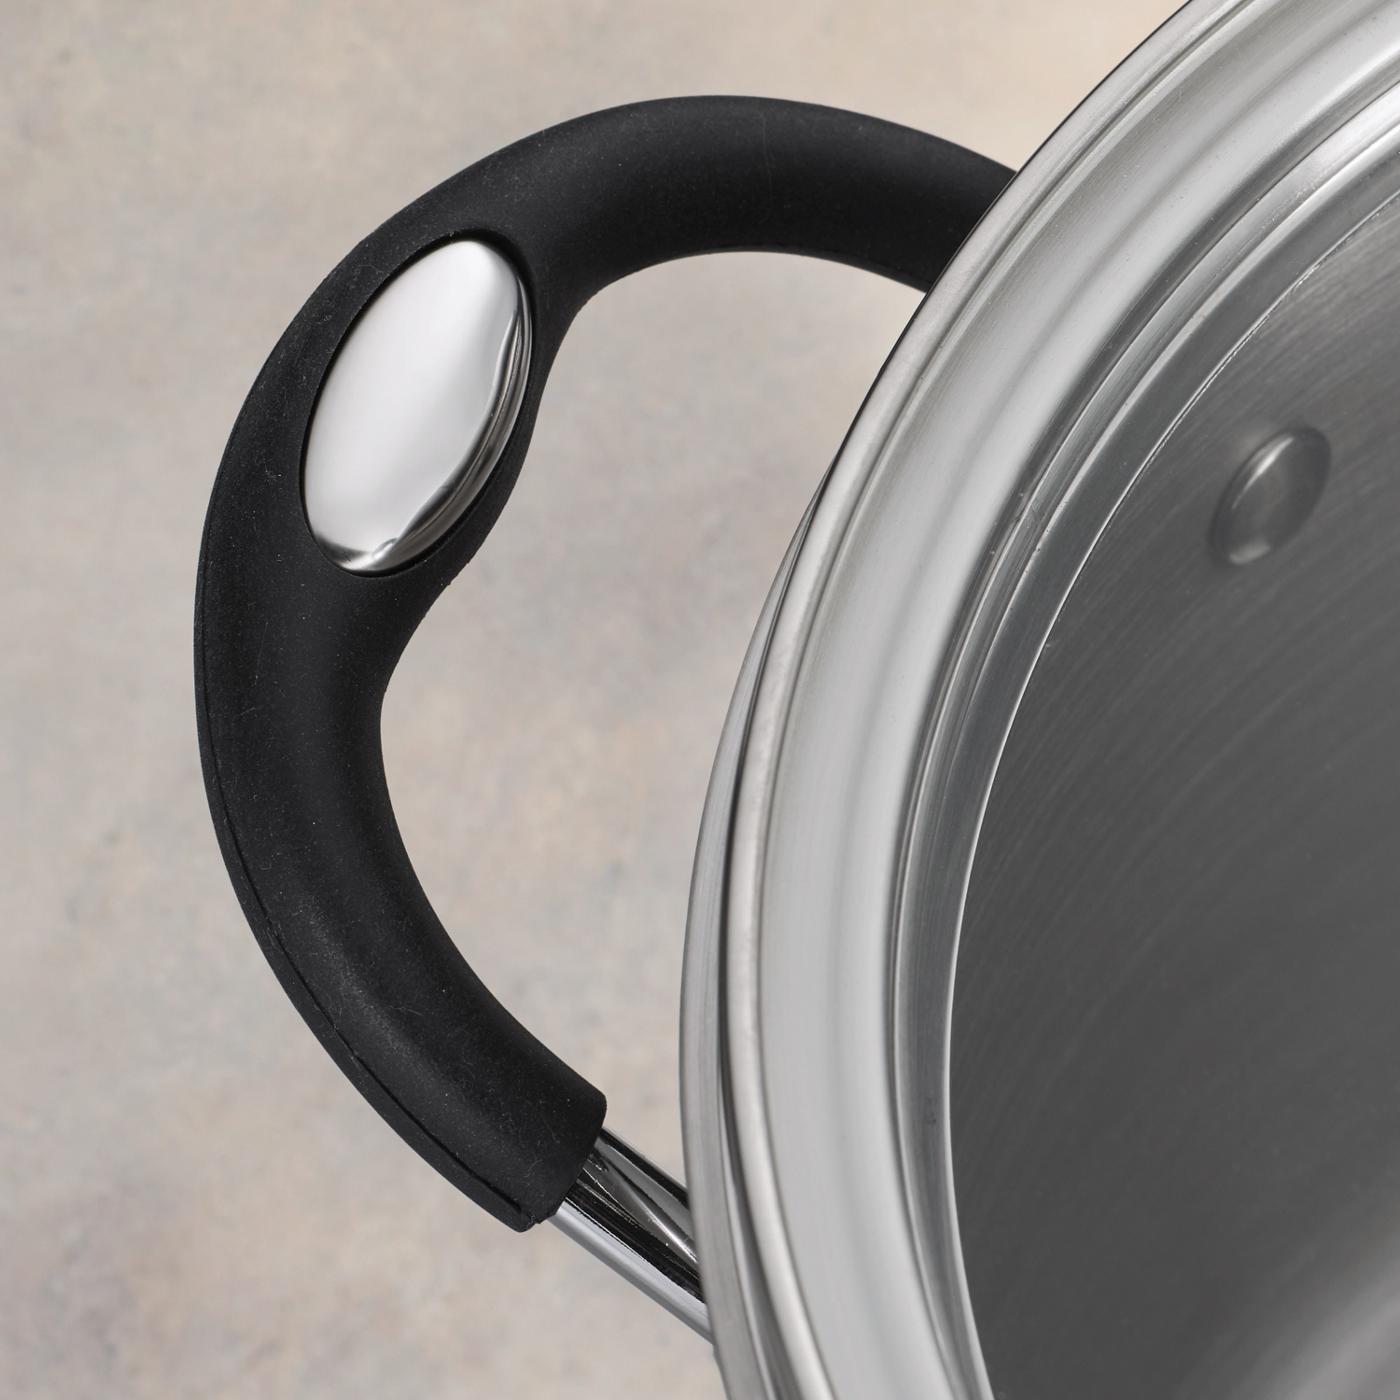 Sonoma Stainless Steel Sauce Pan with Strainer Glass Lid - Shop Stock Pots  & Sauce Pans at H-E-B